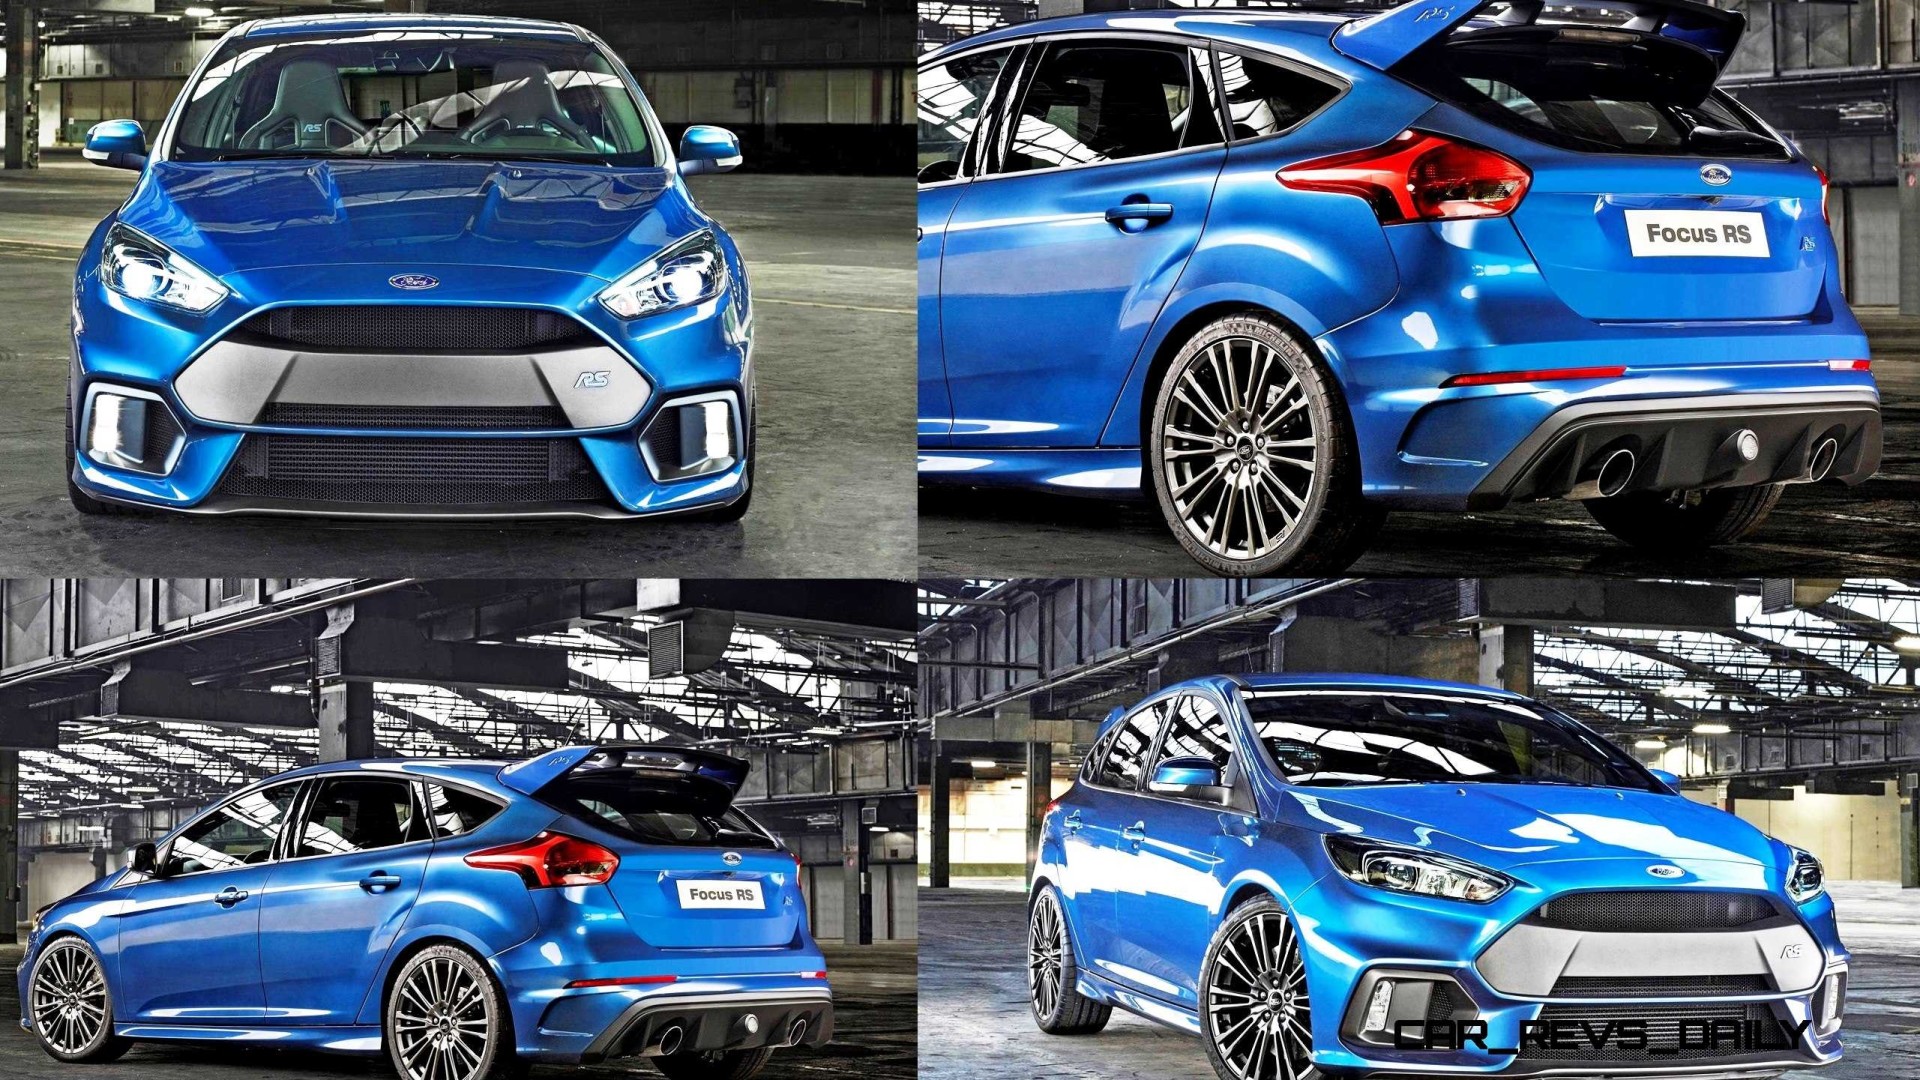 Adorable Ford Focus Rs Wallpapers In High Quality, - Ford Focus - HD Wallpaper 